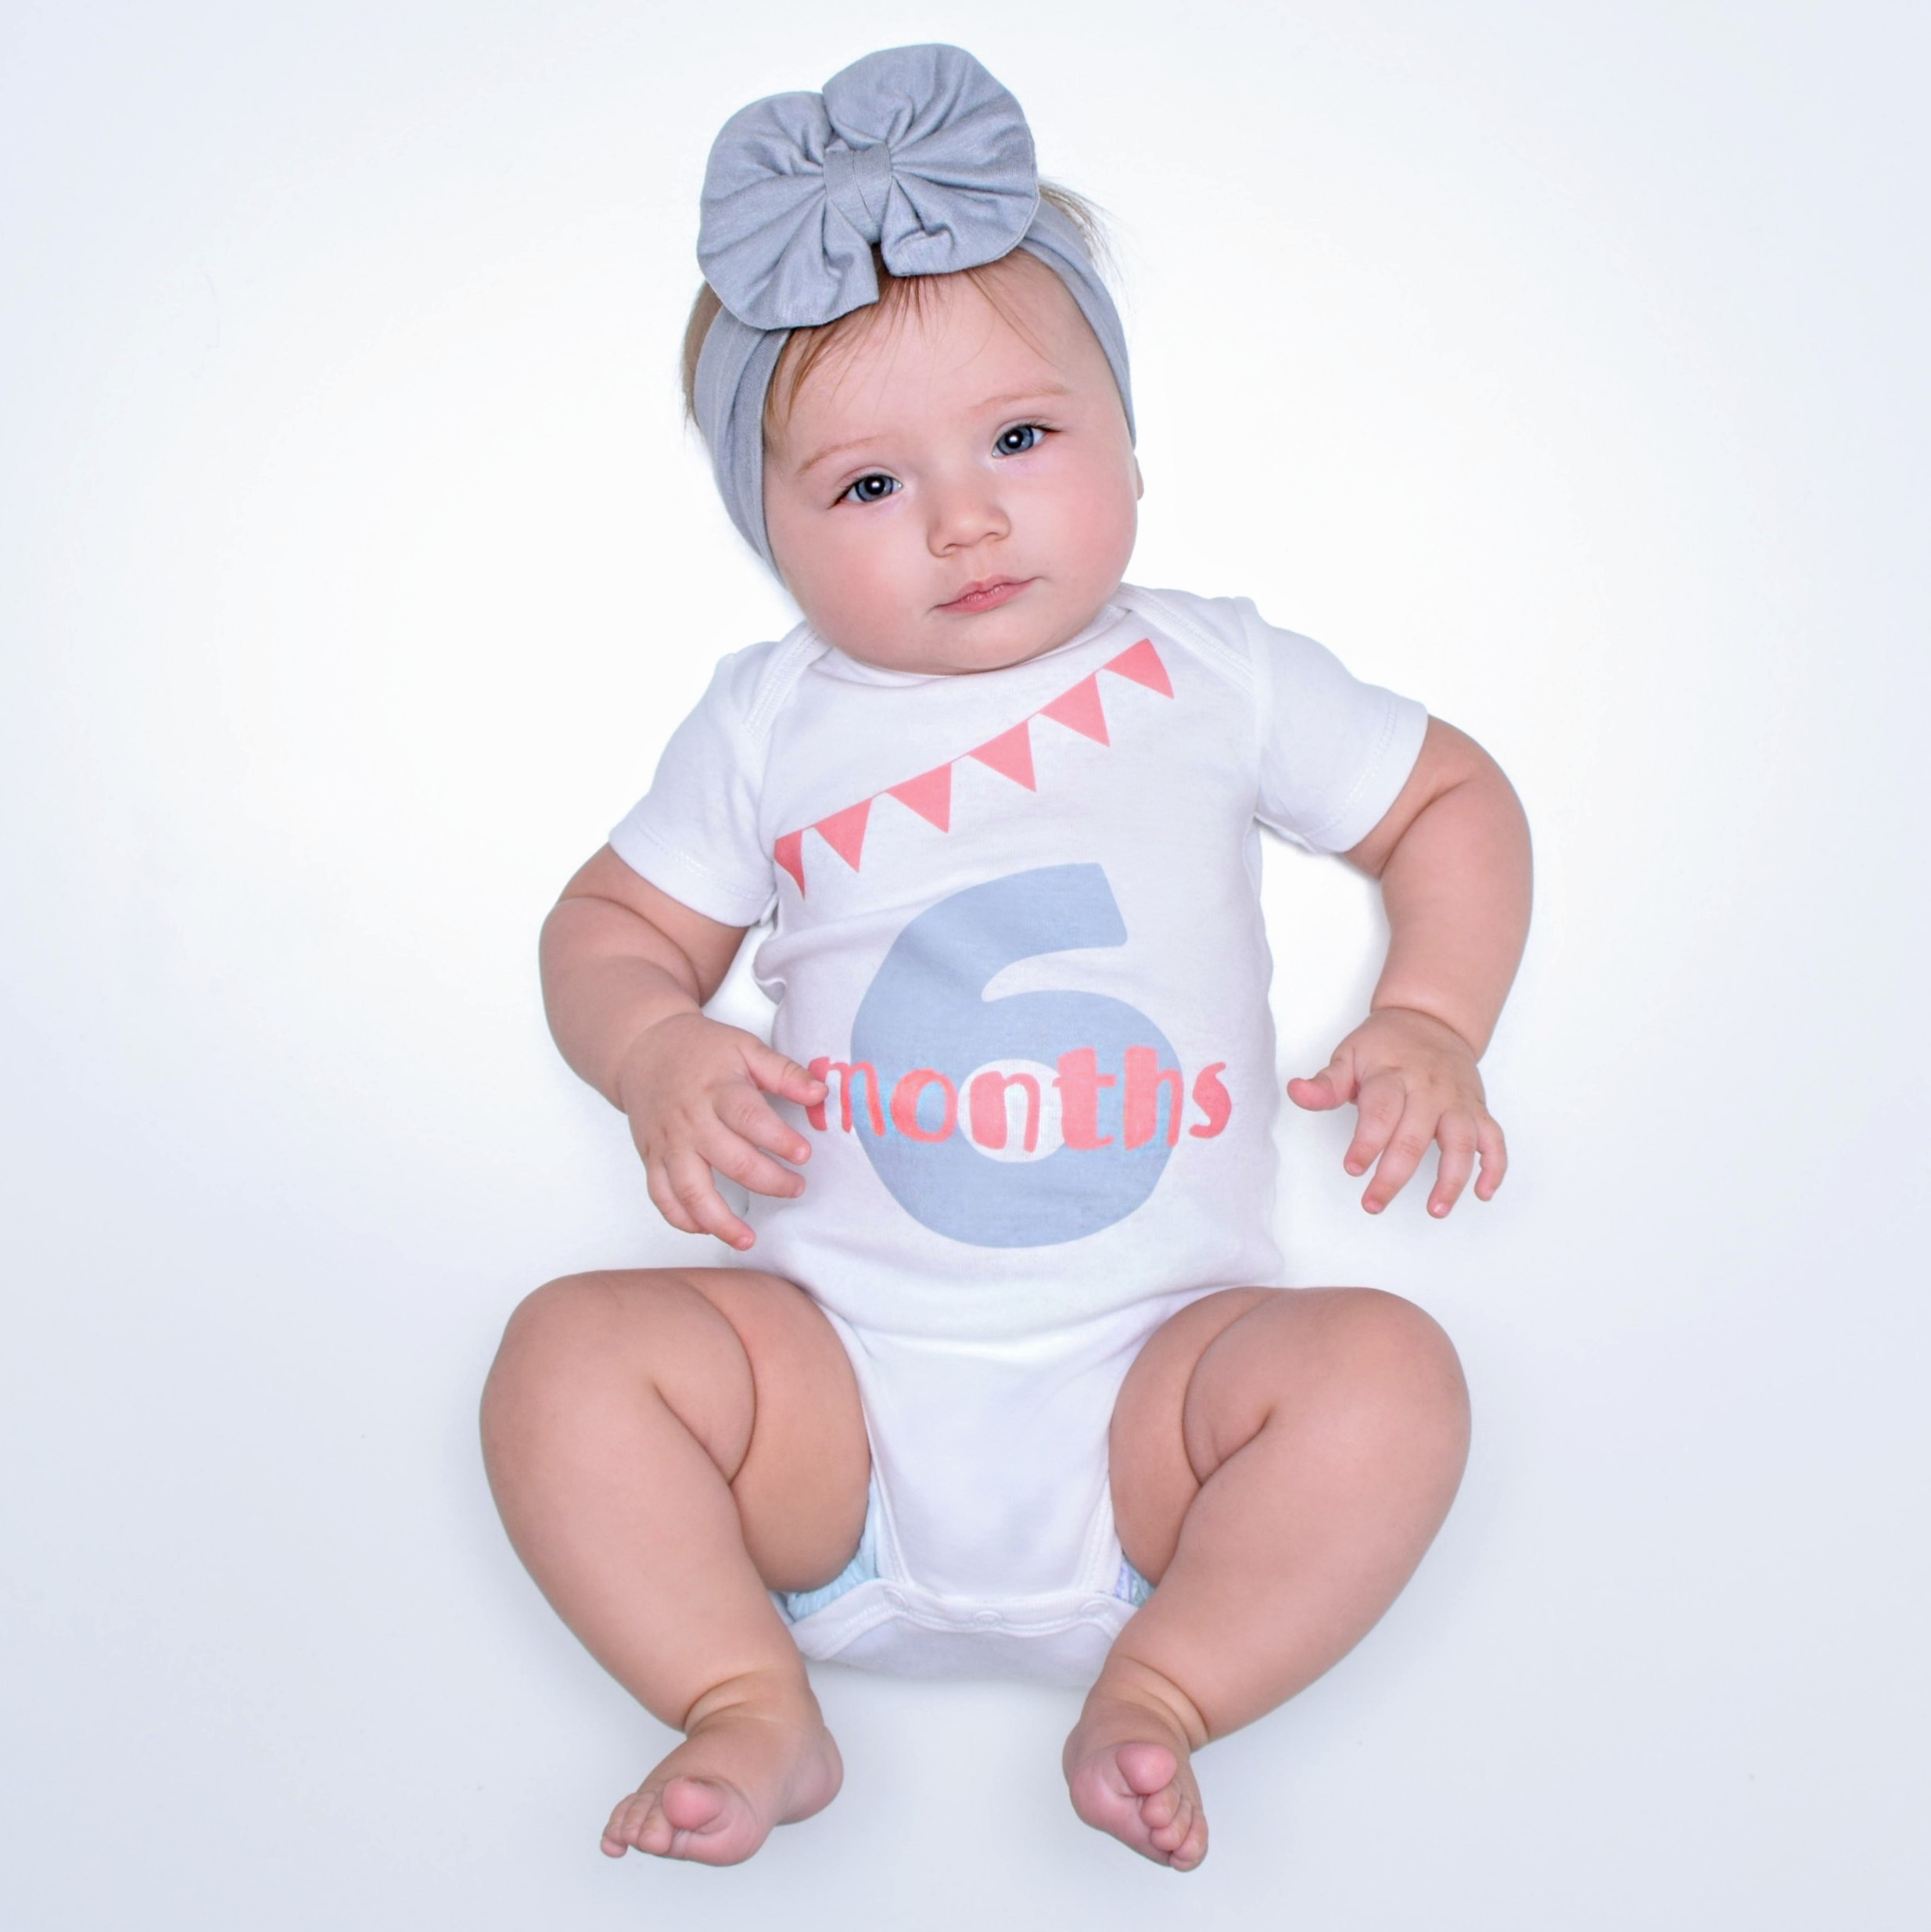 6 month old girl clothes